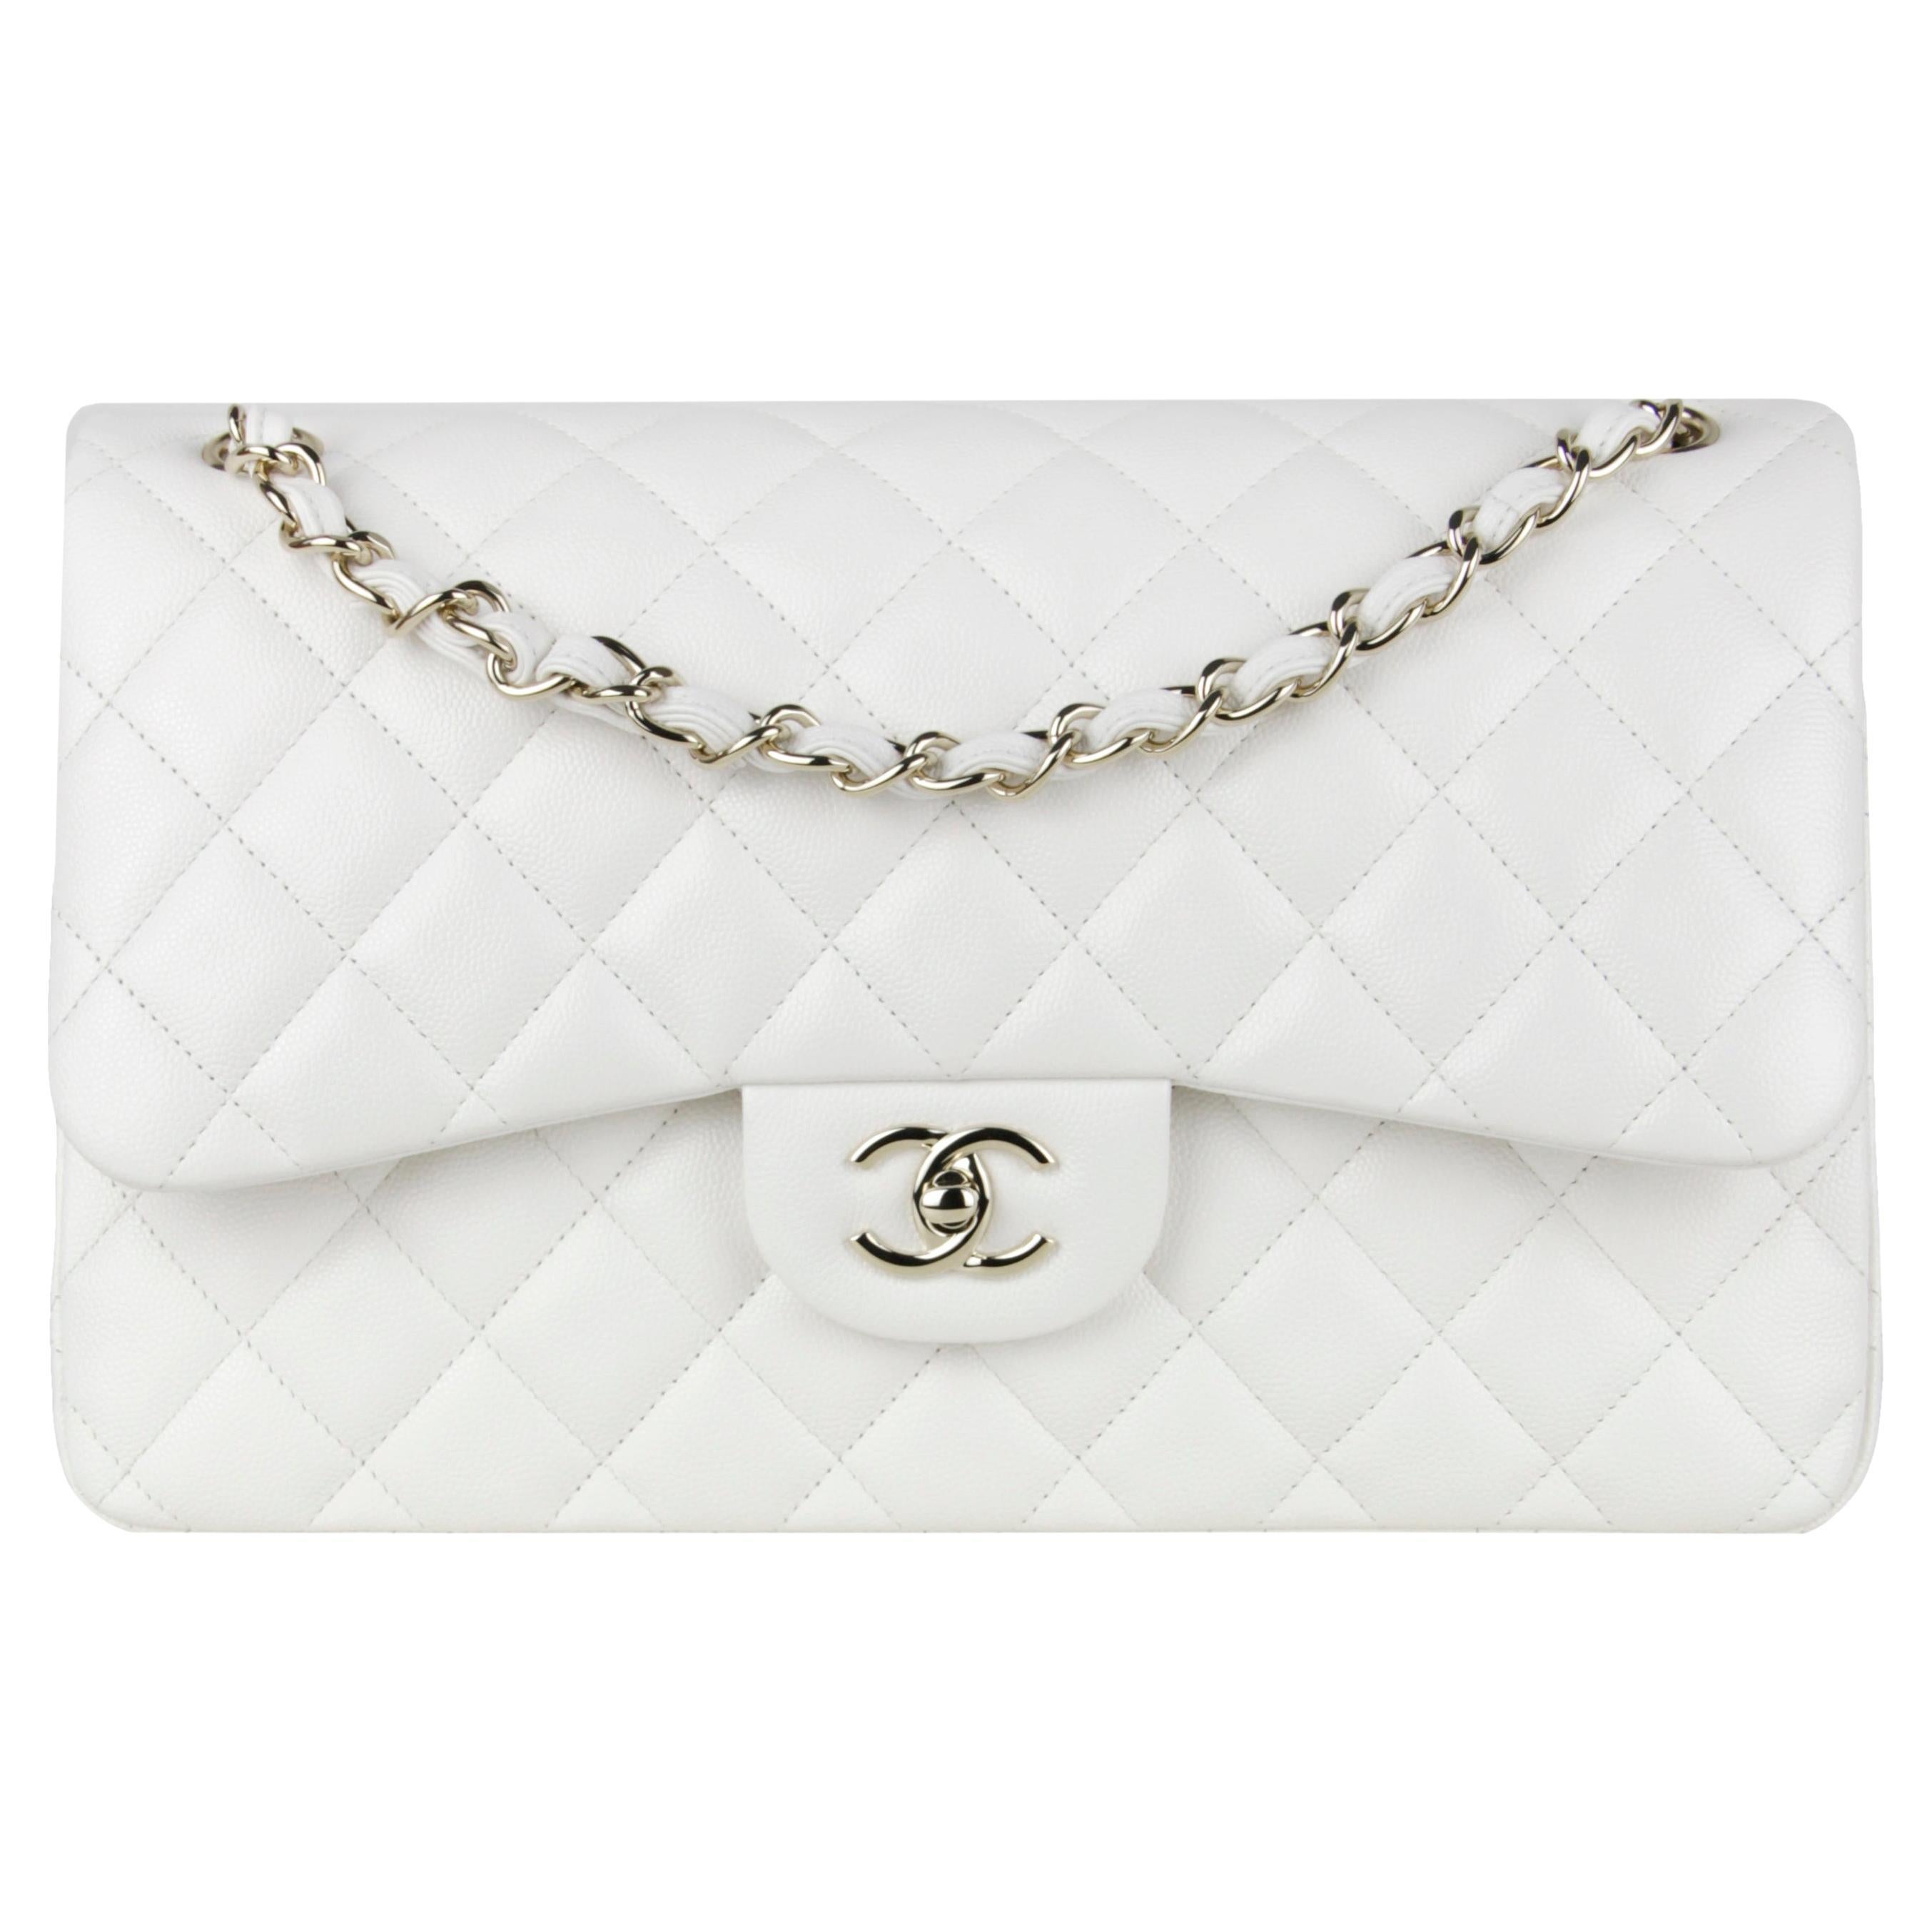 Chanel LIKE NEW White Caviar Leather Quilted Classic Double Flap Jumbo Bag